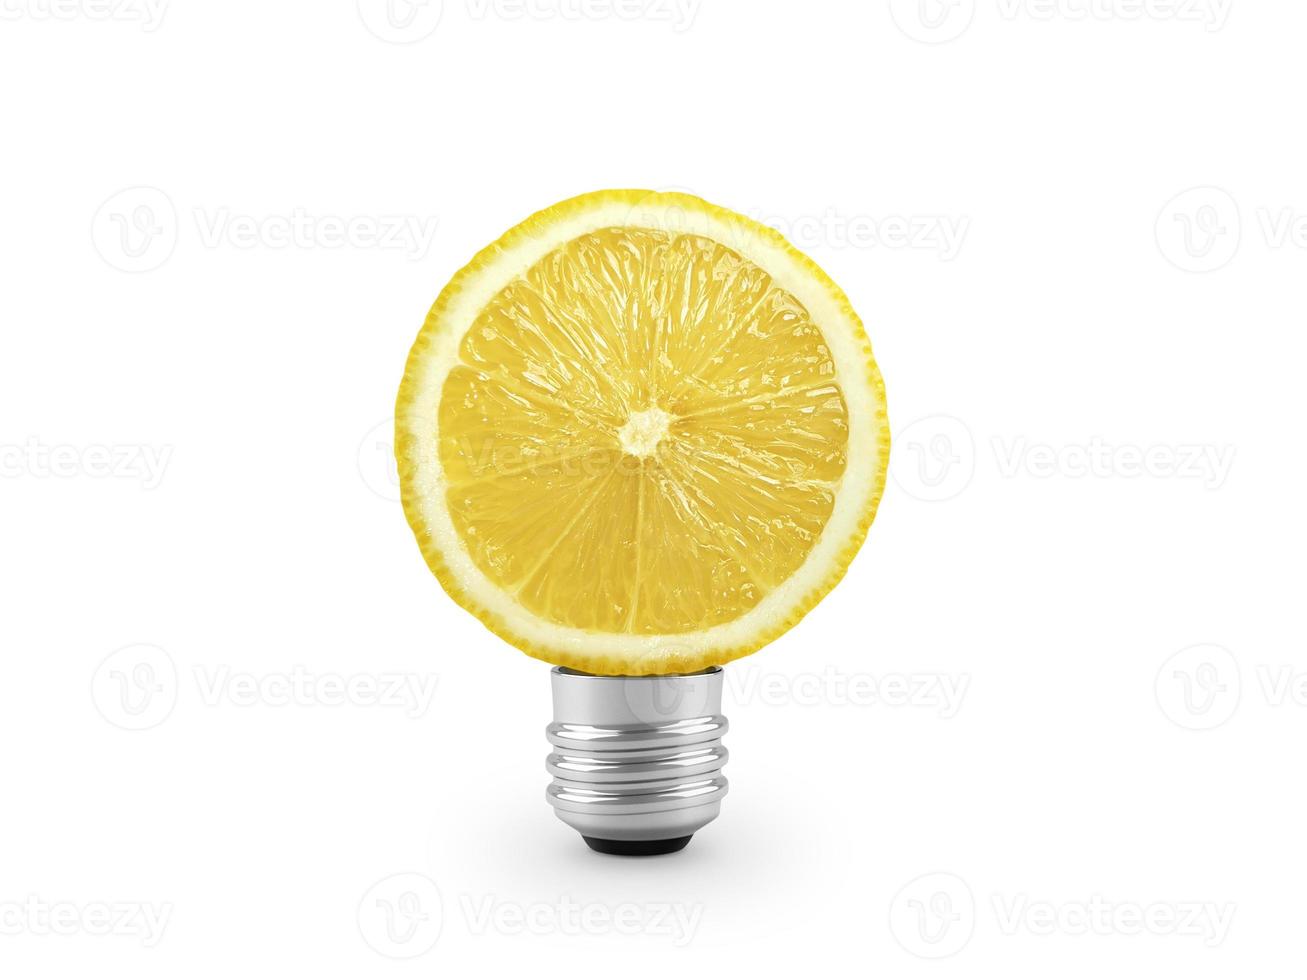 Yellow Lemon light bulb on white background. health and beauty concept photo